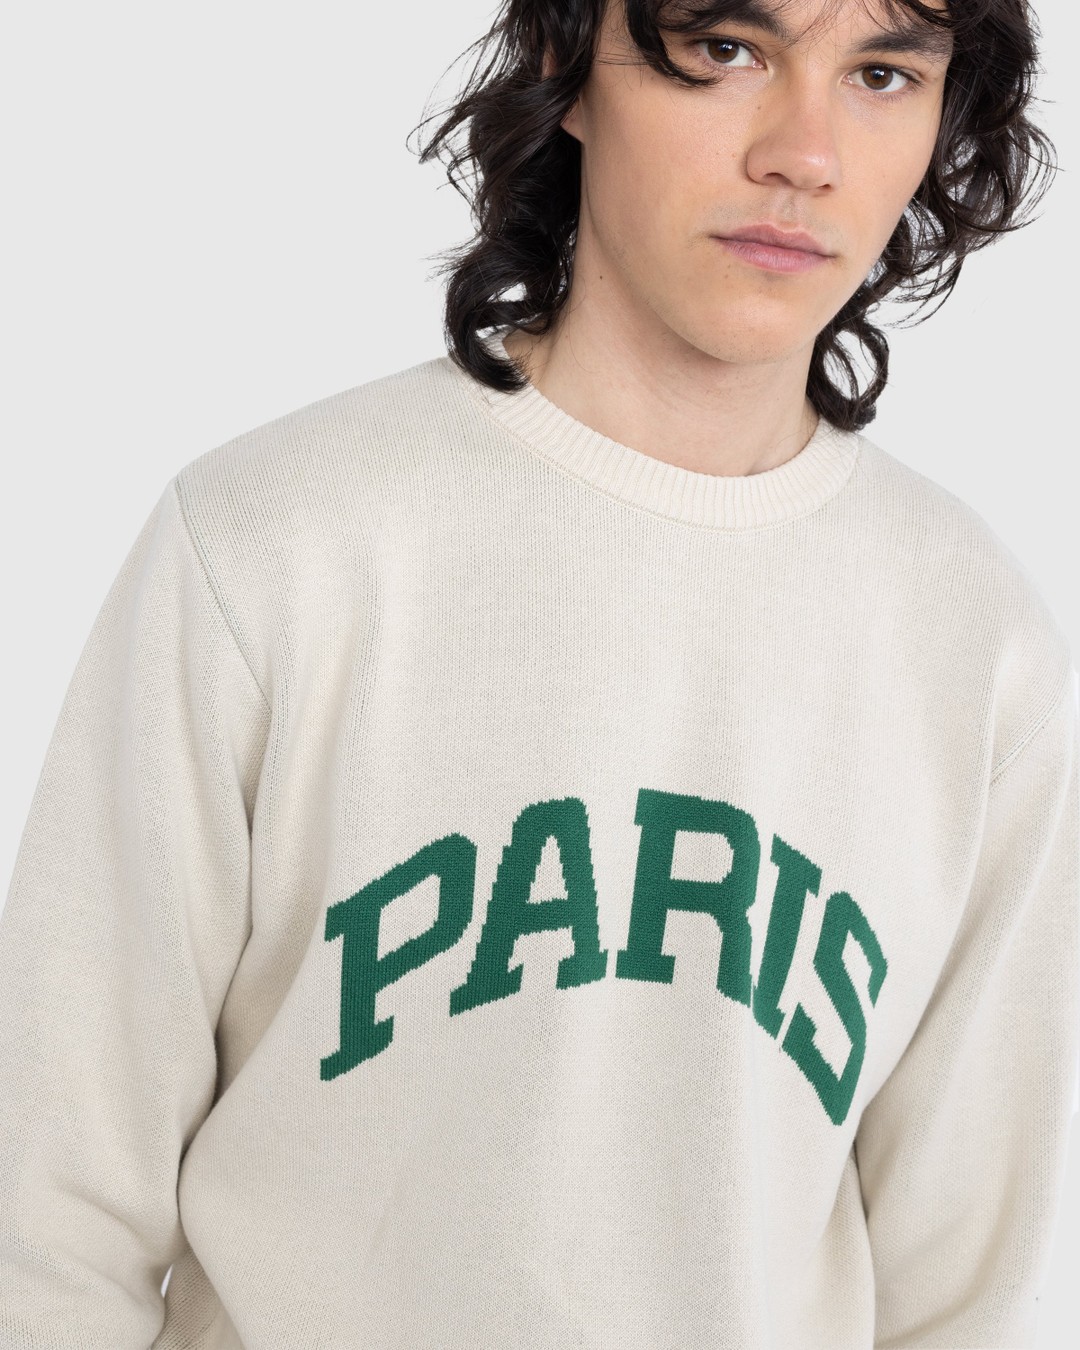 Highsnobiety – Not in Paris 5 Knitted Sweater - Sweats - Beige - Image 4